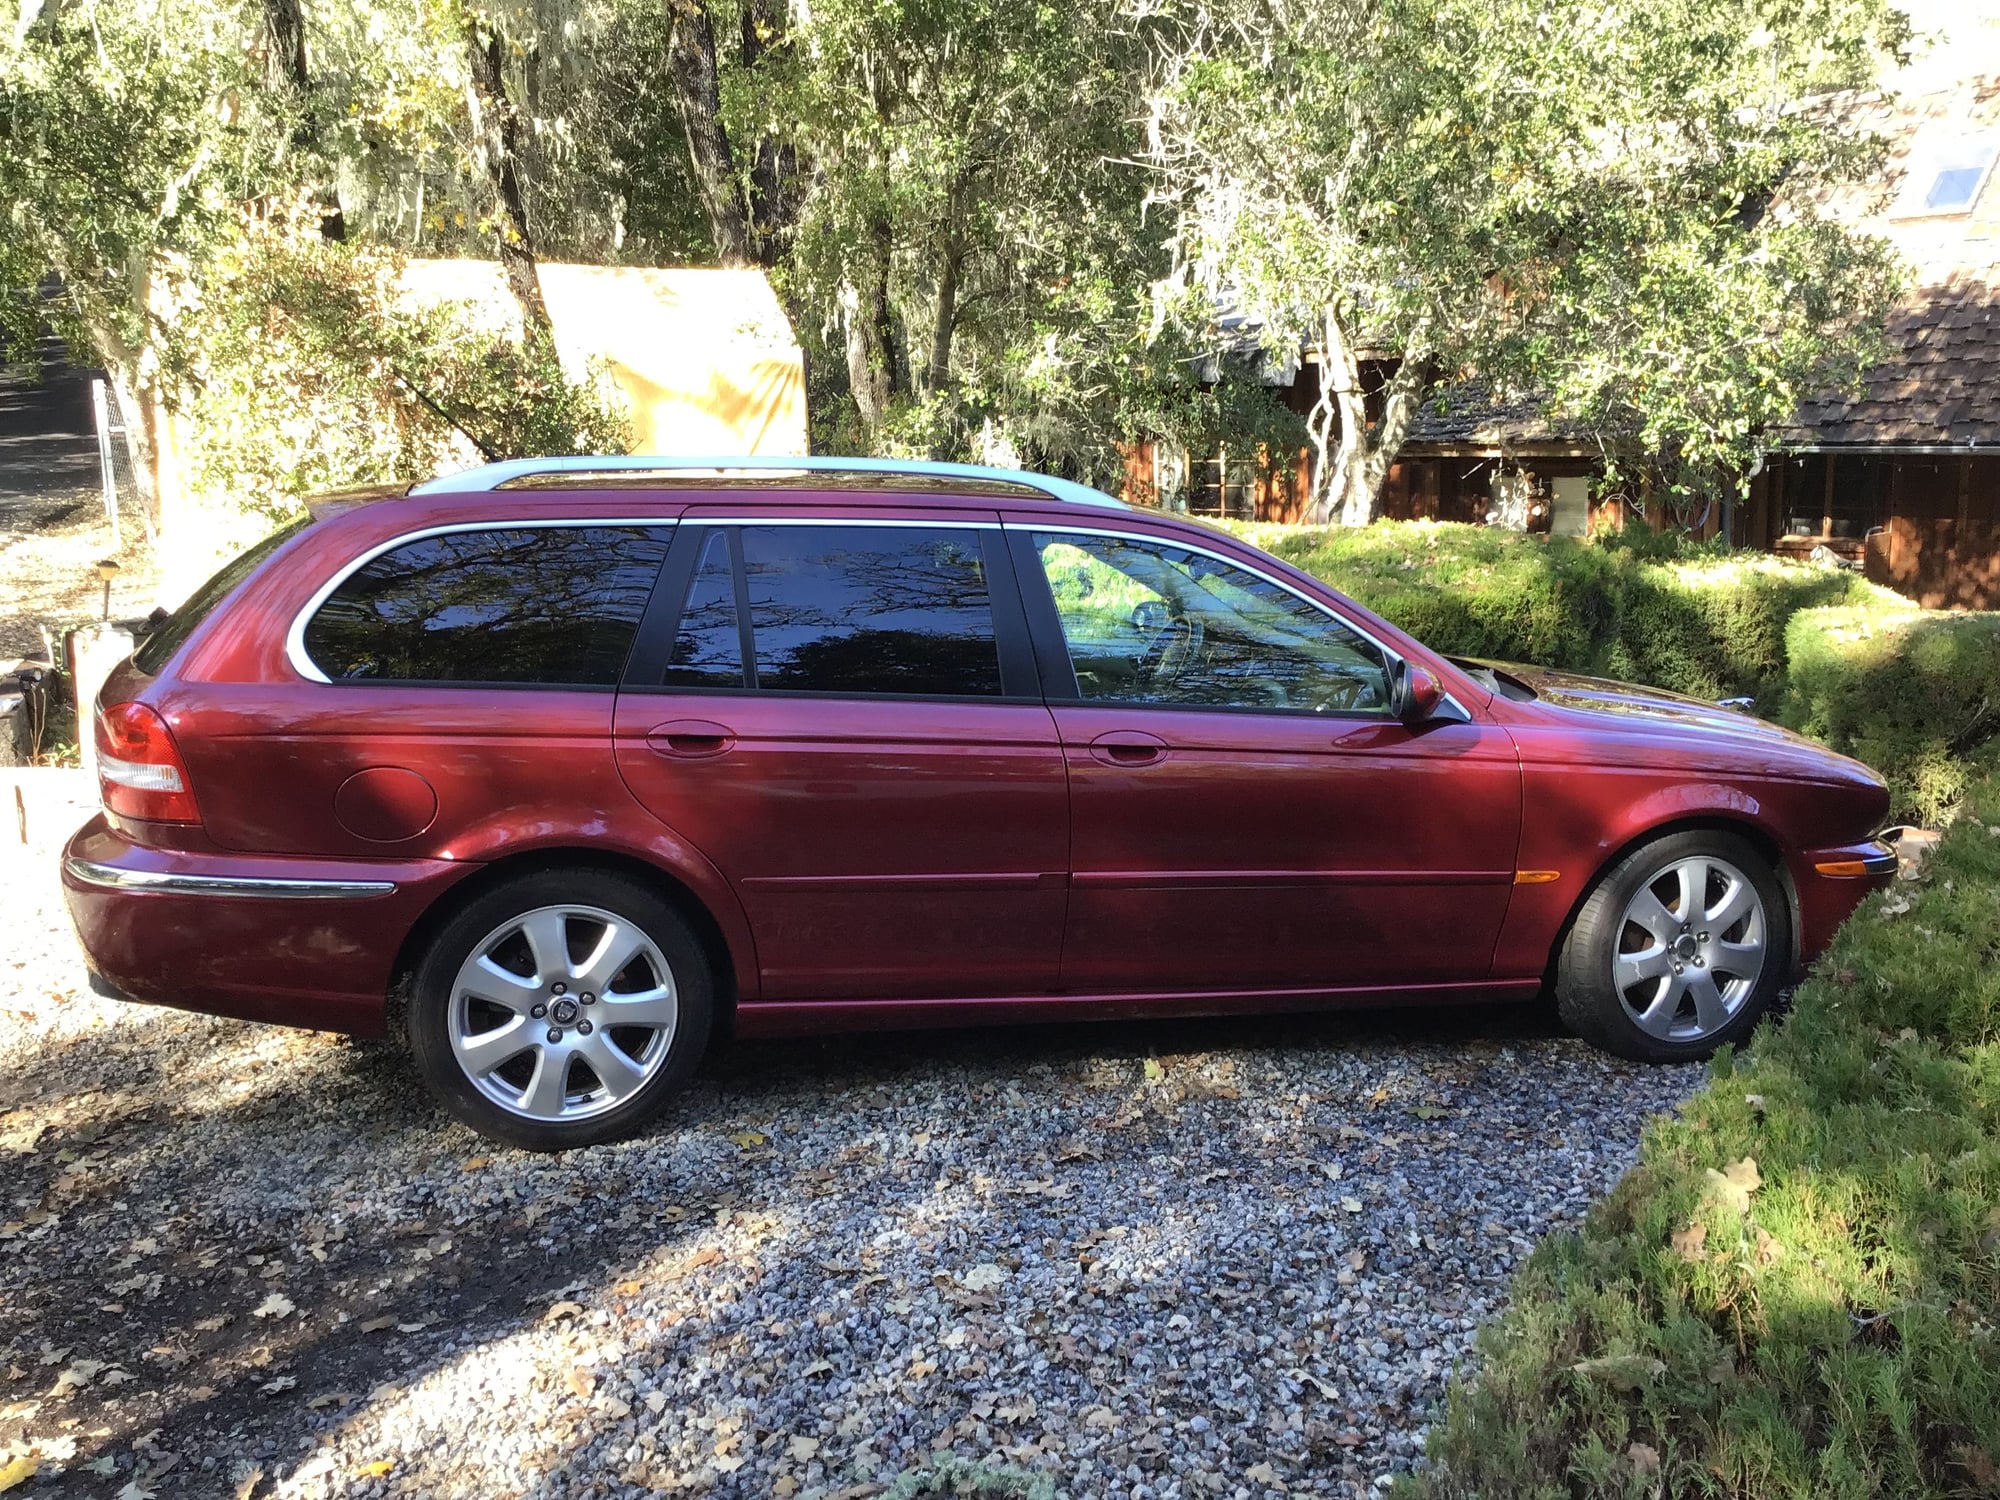 2005 Jaguar X-Type - 2005 x type wagon 3.0 - Used - VIN SAJWA54A05WE56421 - 127,490 Miles - 6 cyl - AWD - Automatic - Wagon - Red - Templeton, CA 93465, United States